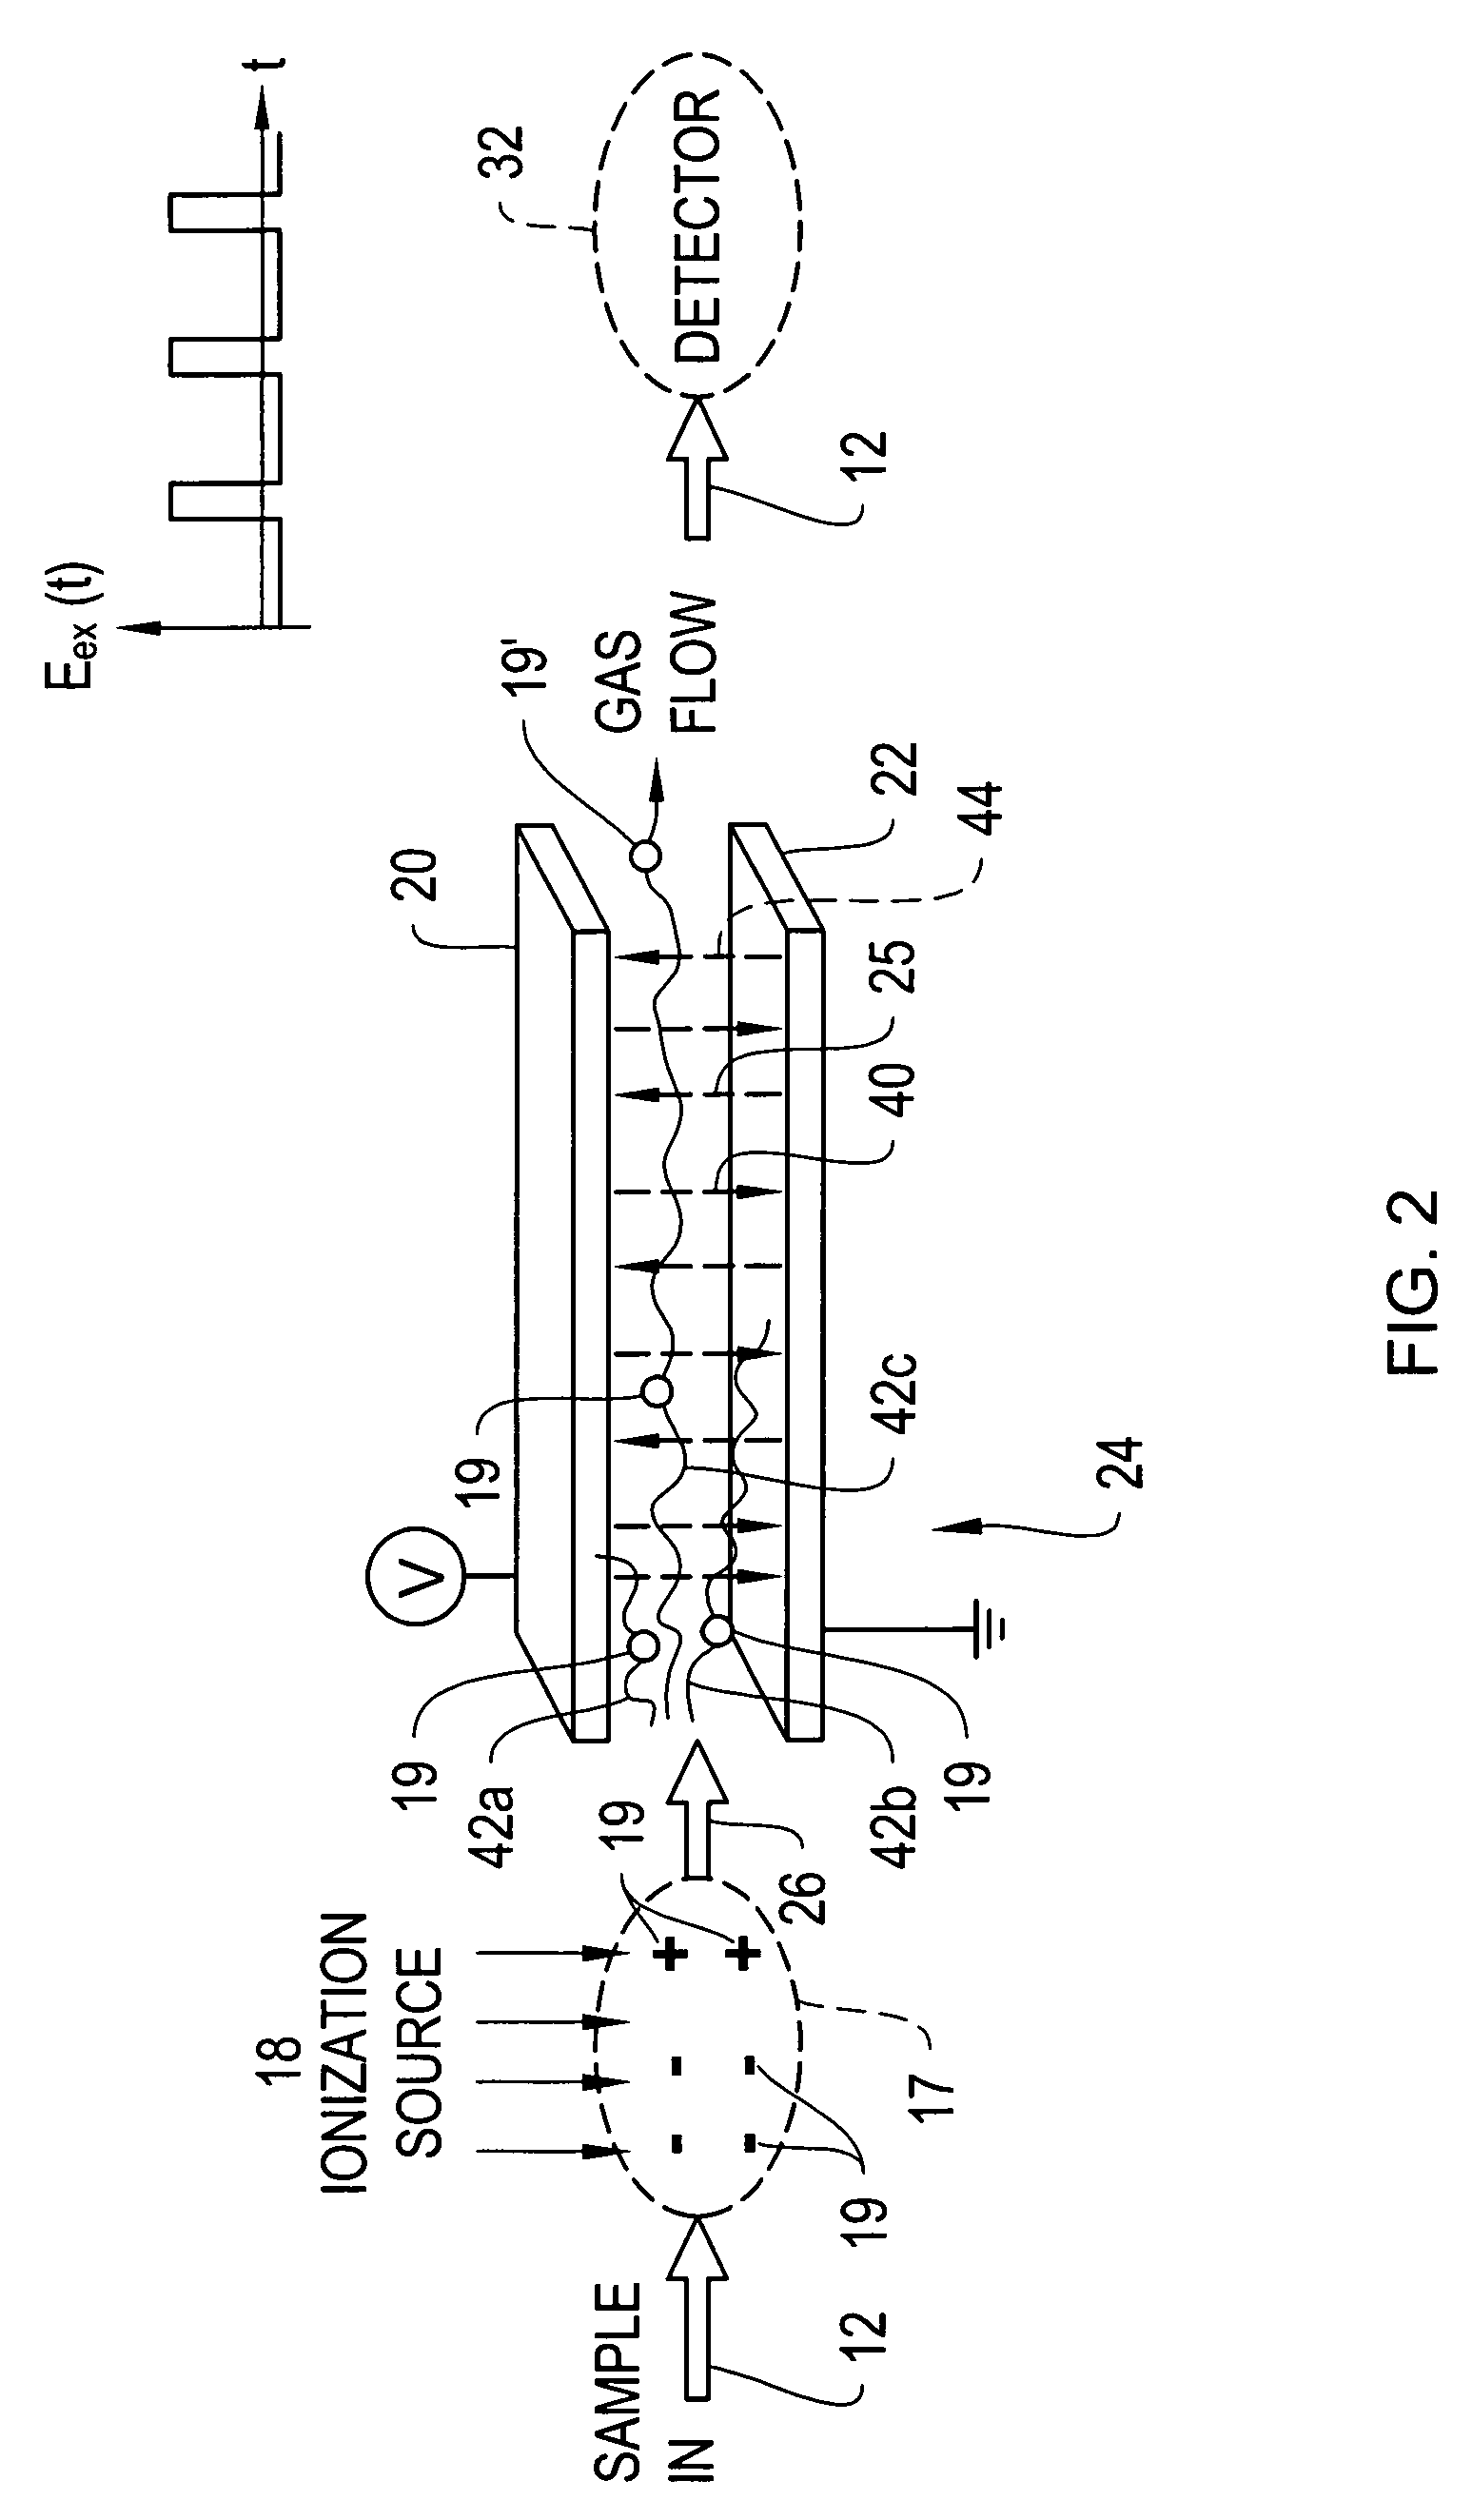 Ultra compact ion mobility based analyzer apparatus, method, and system